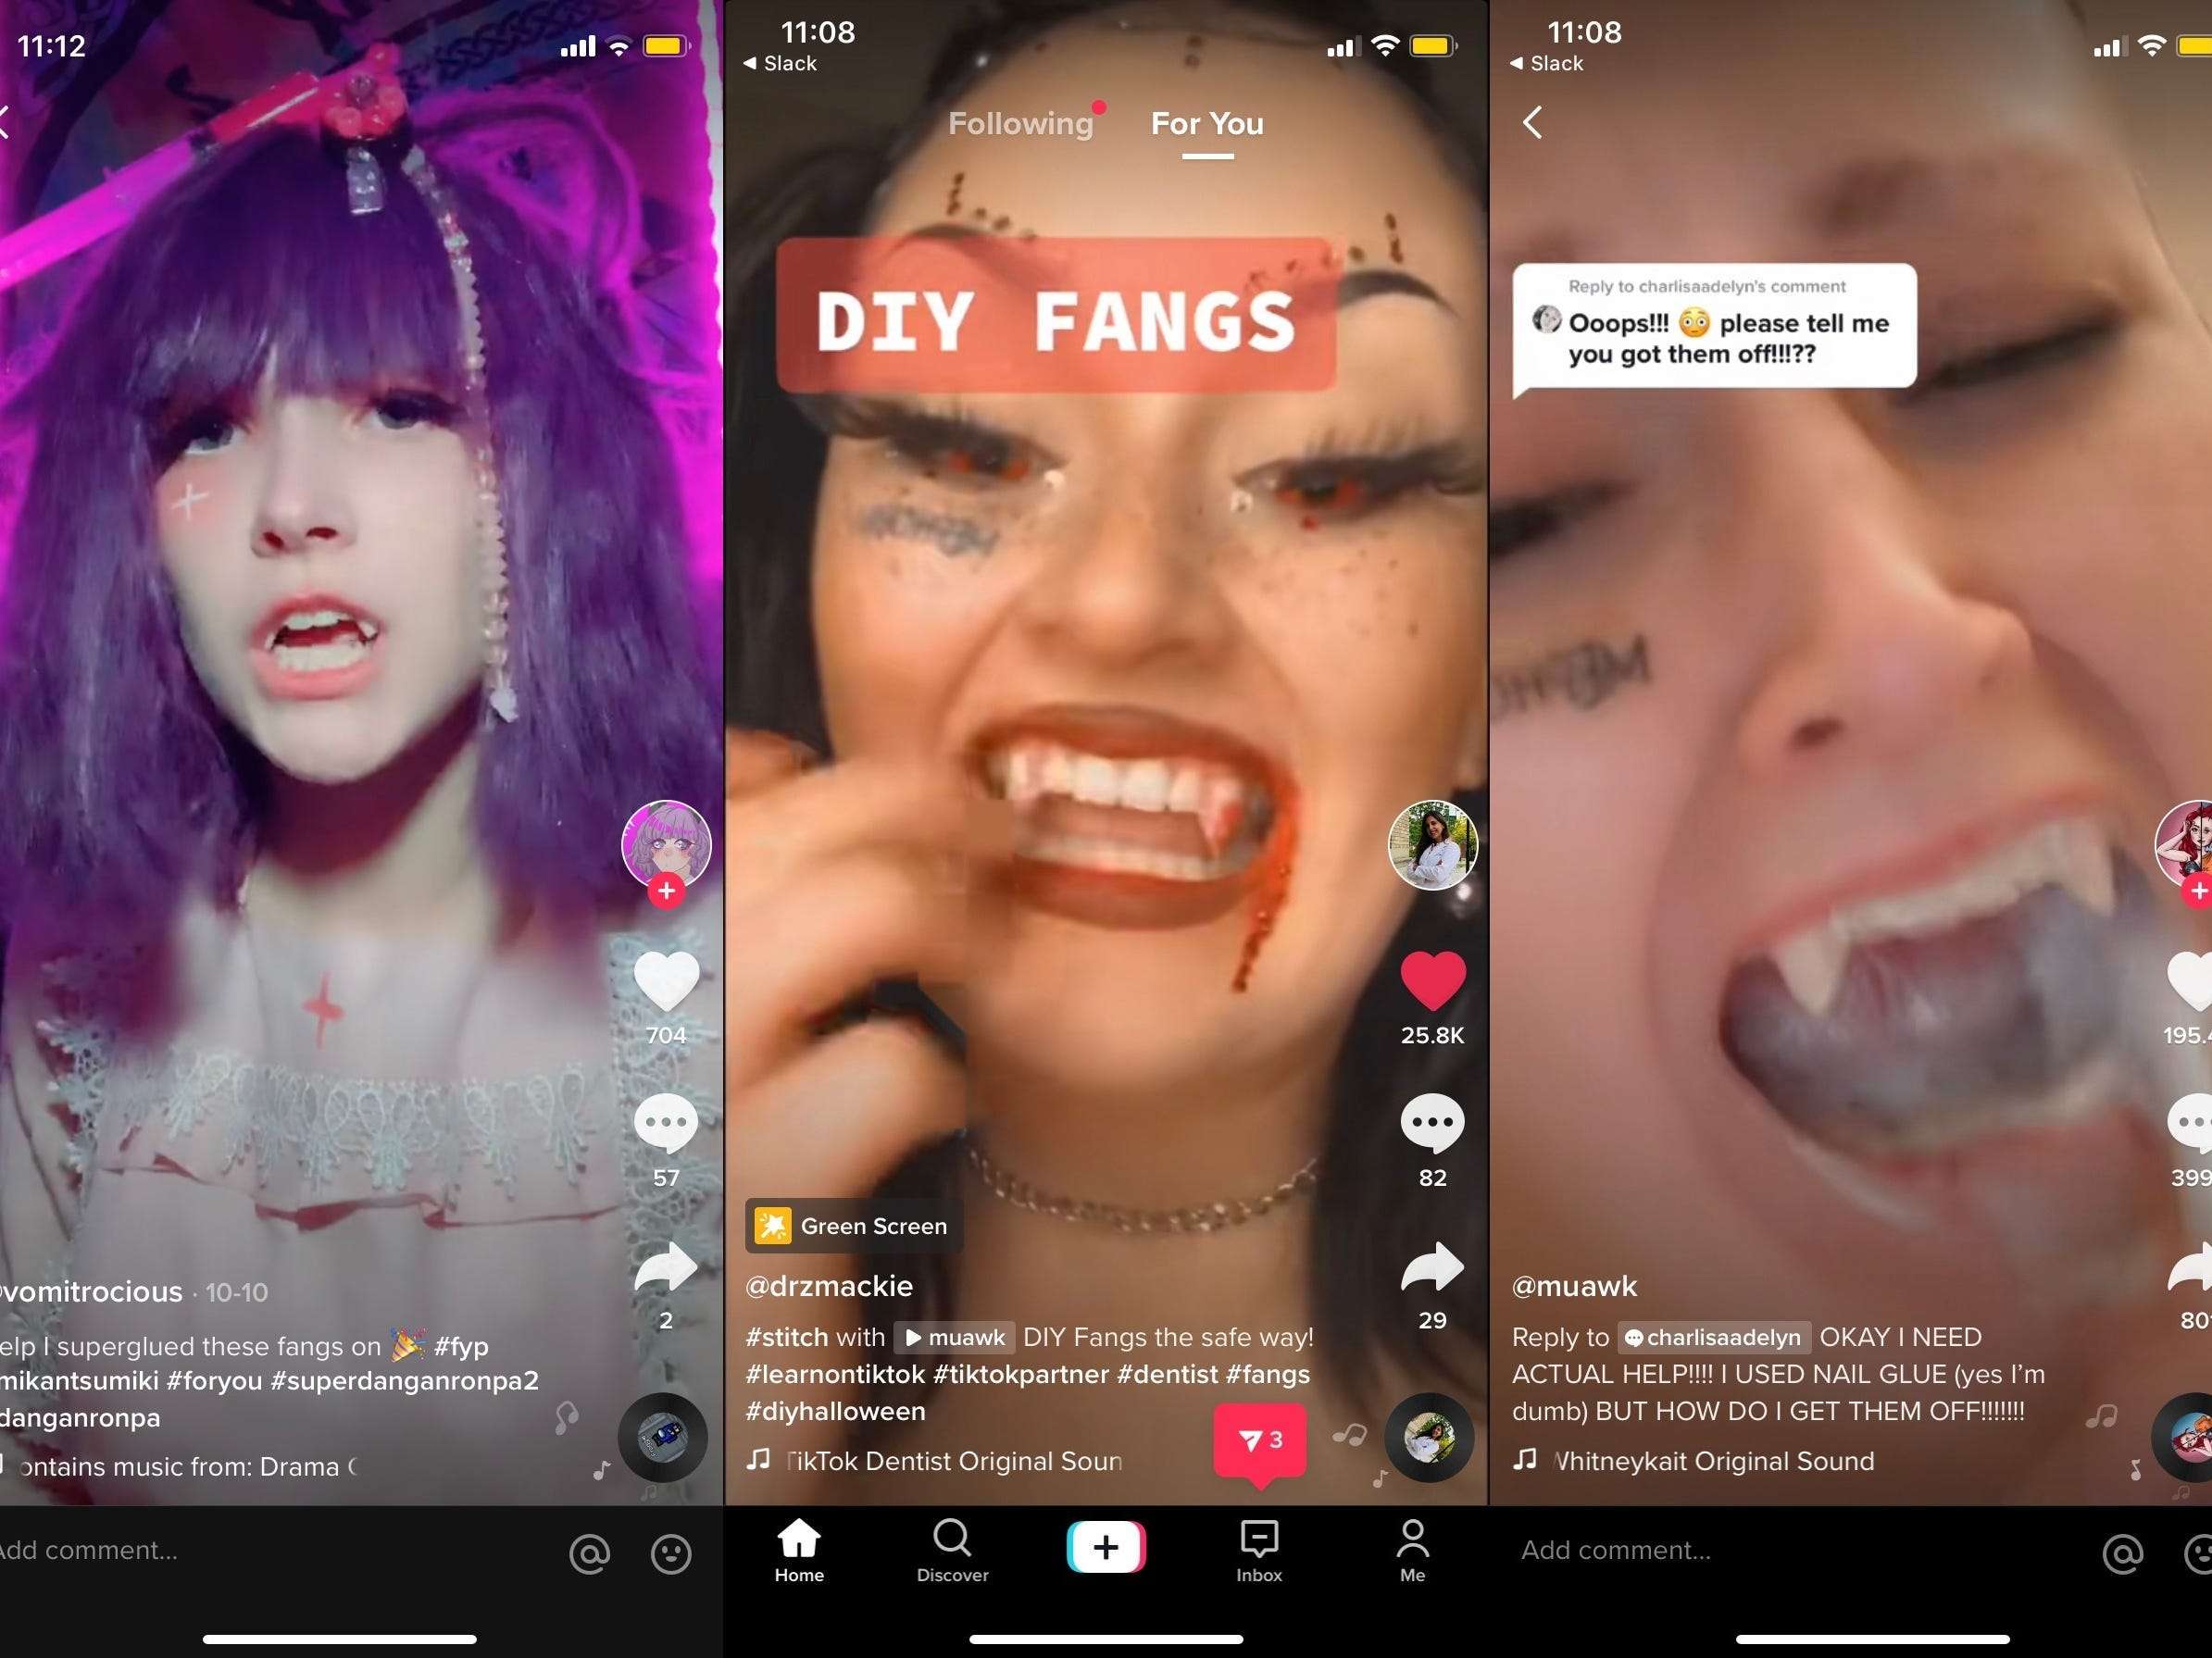 Tiktok Users Are Super Gluing Vampire Fangs To Their Teeth And Struggling To Get Them Off Dentists Are Not Happy About It Business Insider India